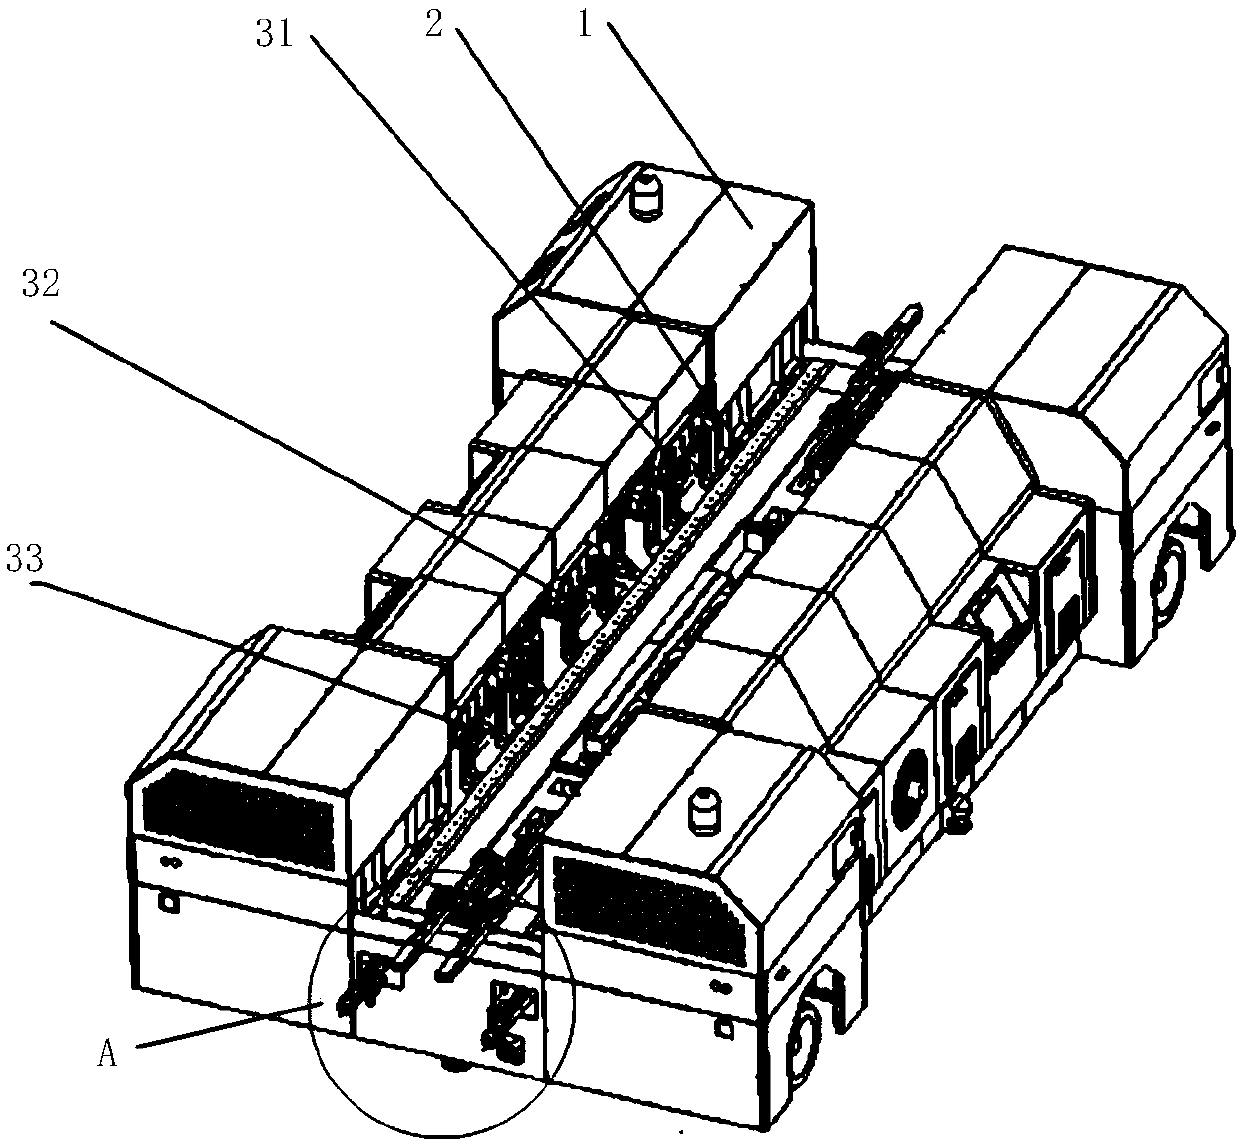 Vision measurement and calibration-based AGV automatic posture adjusting and positioning method